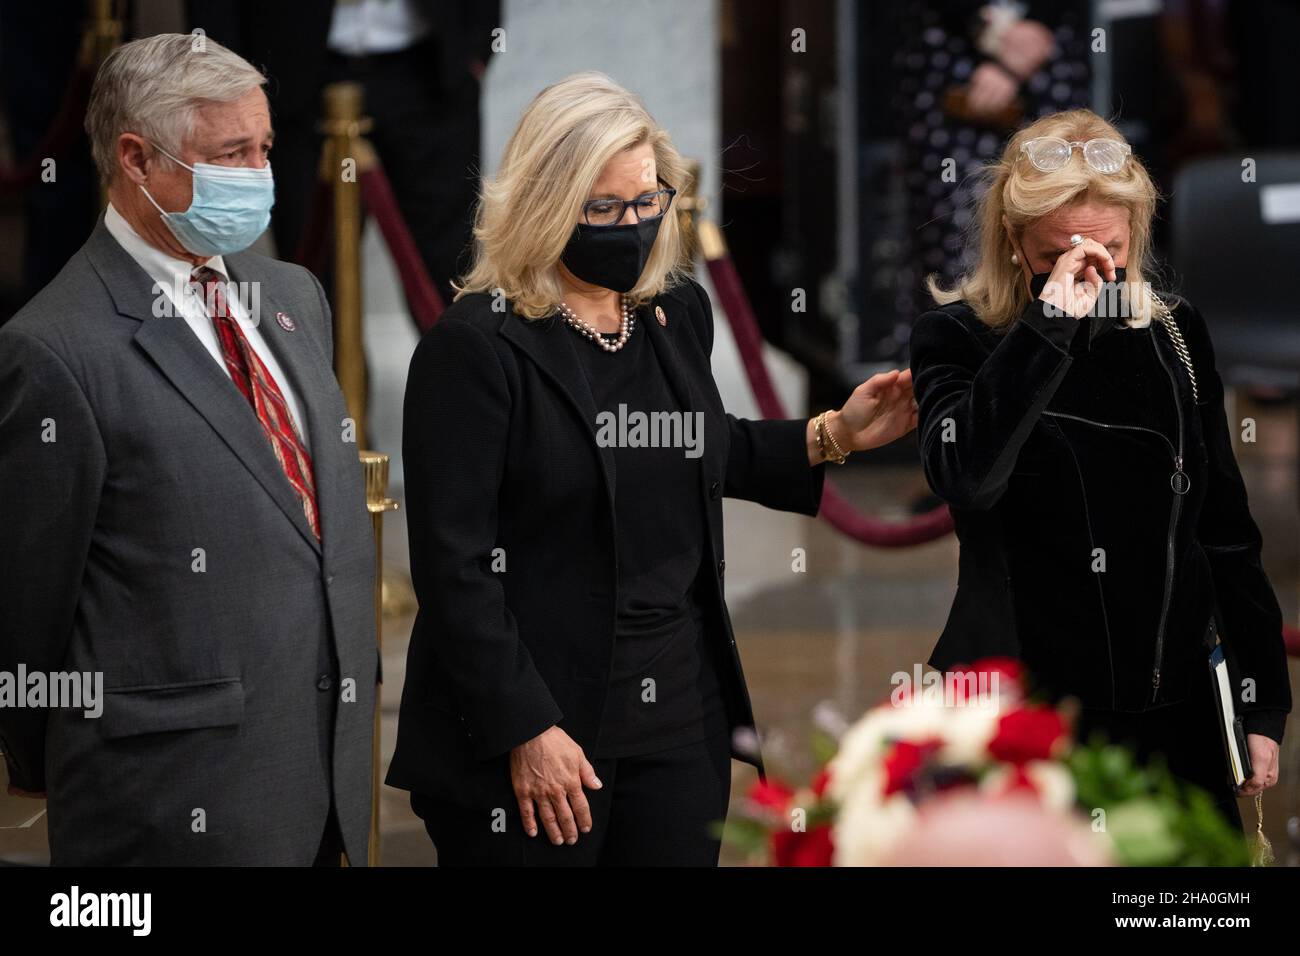 United States Representative Liz Cheney (Republican of Wyoming), center, and US Representative Debbie Dingell (Democrat of Michigan), right, become emotional while paying their respects to former Senator Robert J. Dole (R-KS) as he lies in state at the Rotunda of the U.S. Capitol in Washington, DC on Thursday, December 9, 2021. Credit: Sarahbeth Maney/Pool via CNP /MediaPunch Stock Photo